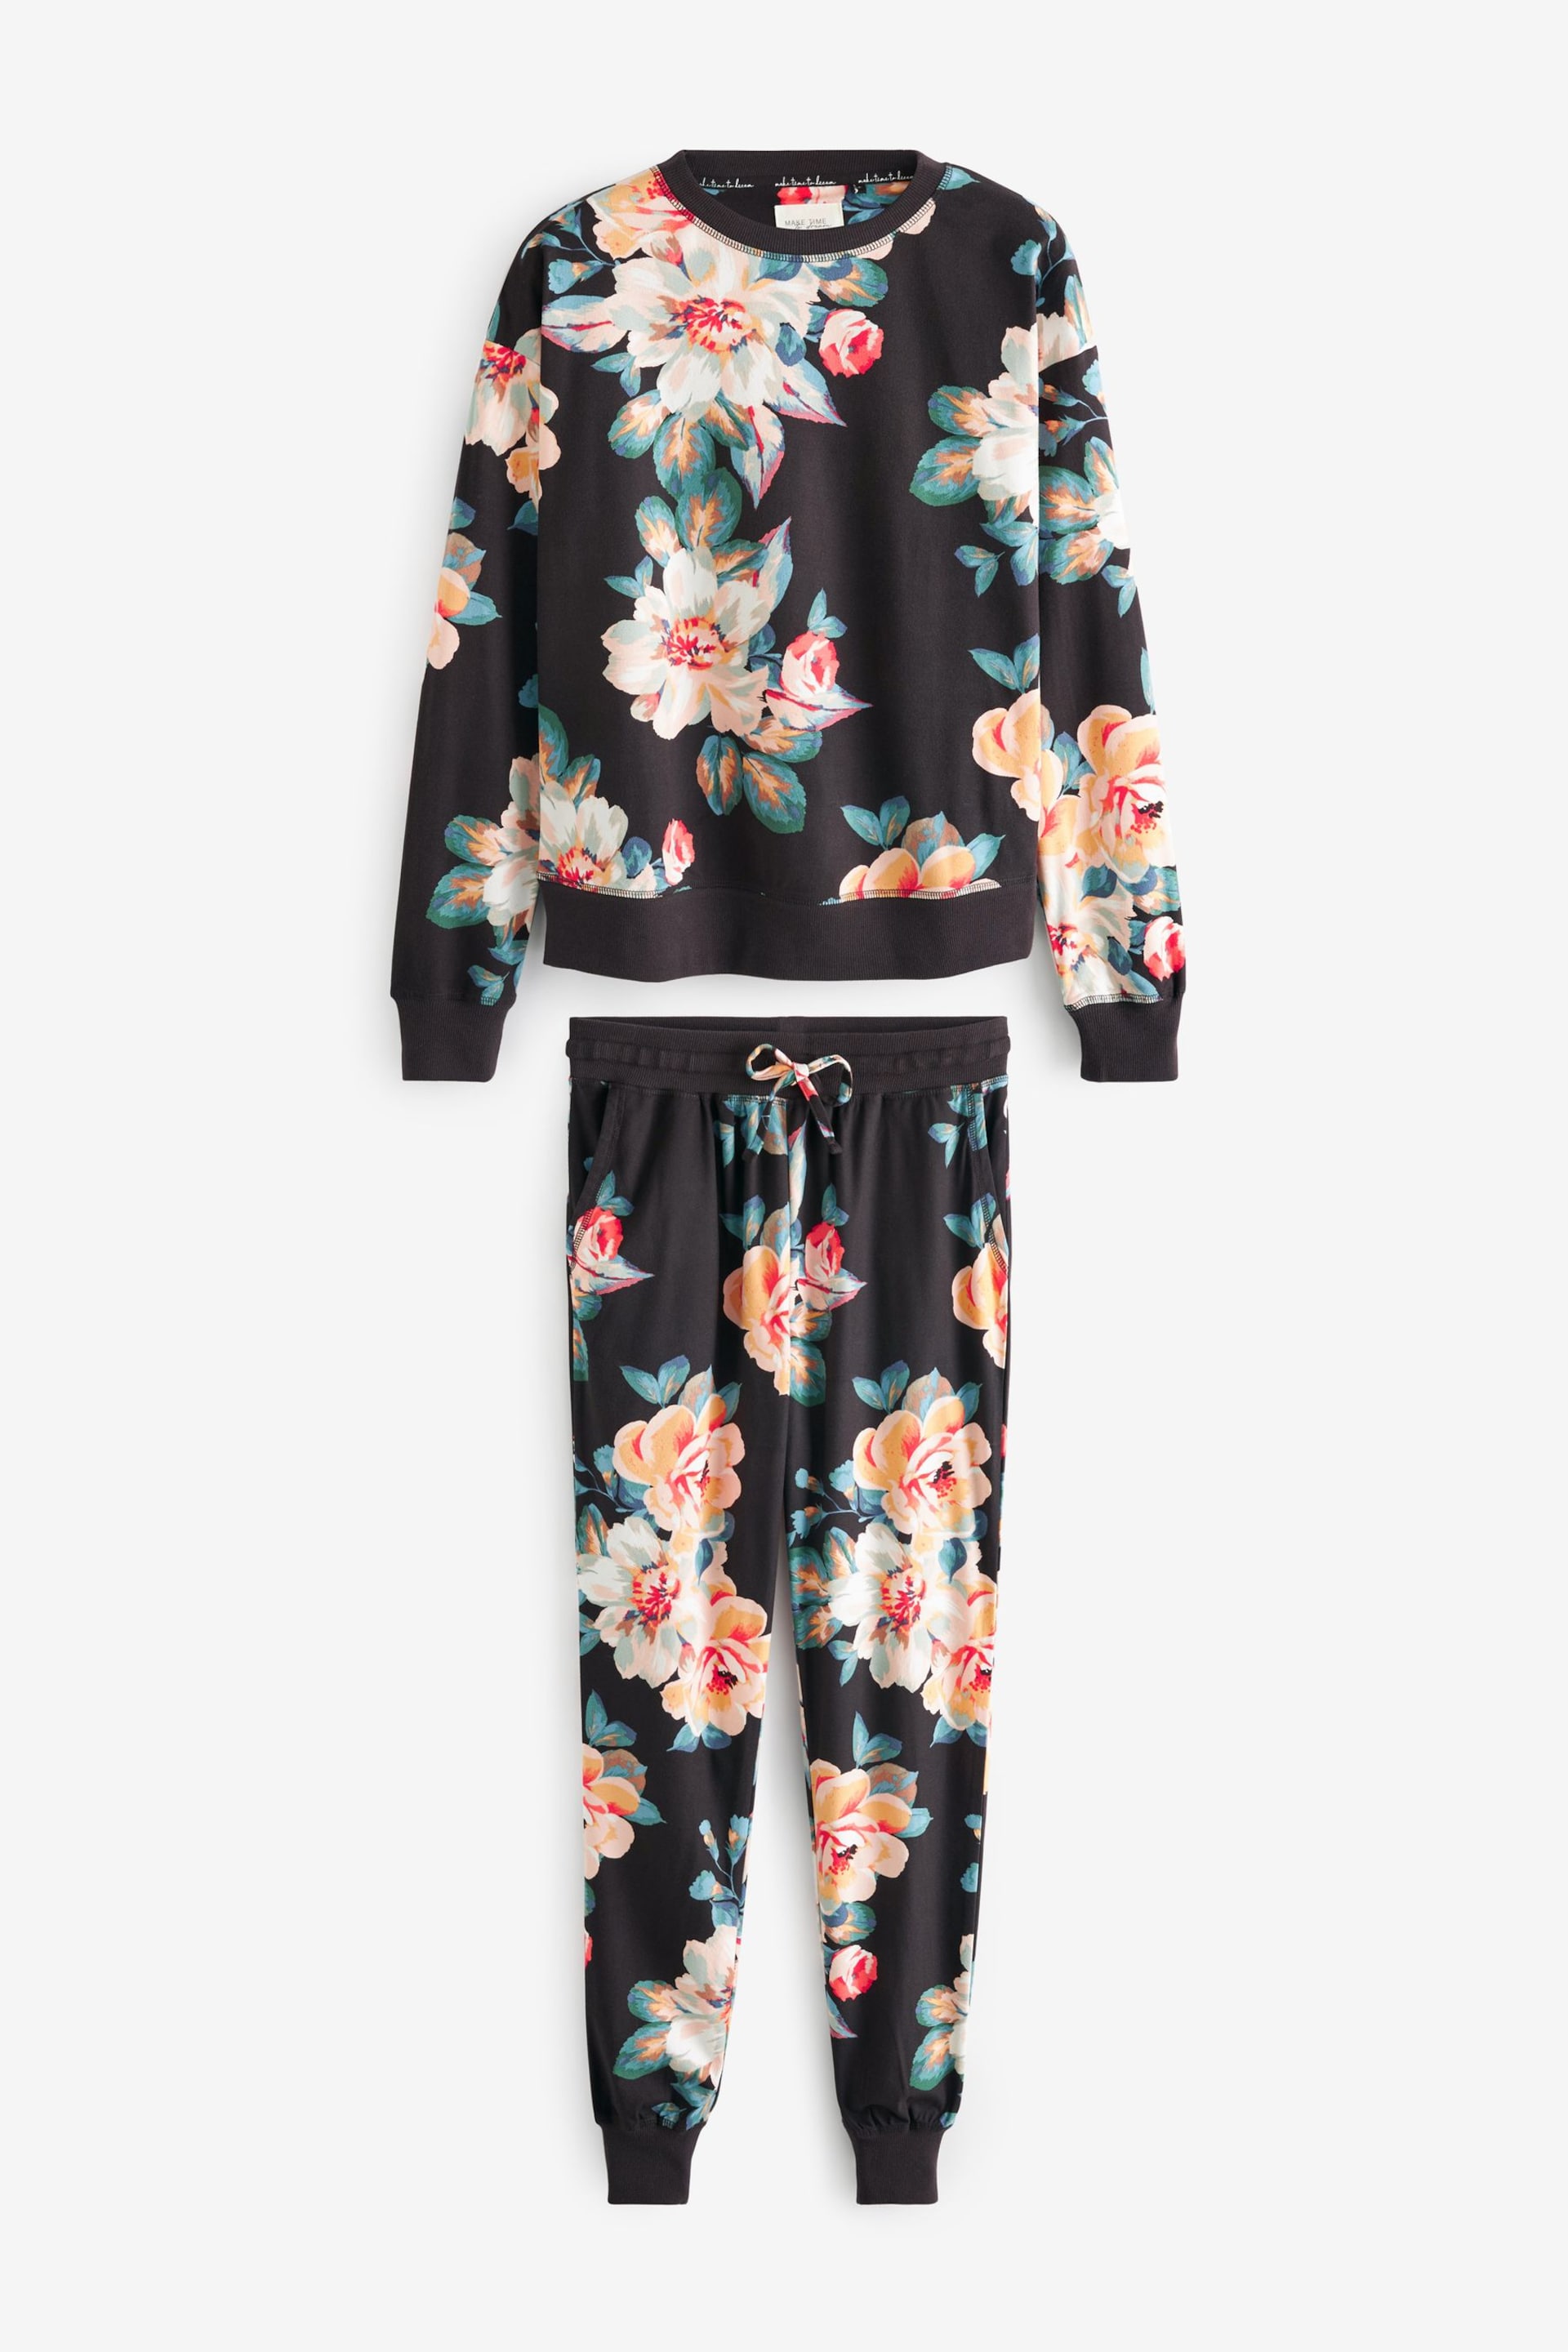 Black Floral Supersoft Cosy Pyjamas - Image 5 of 8